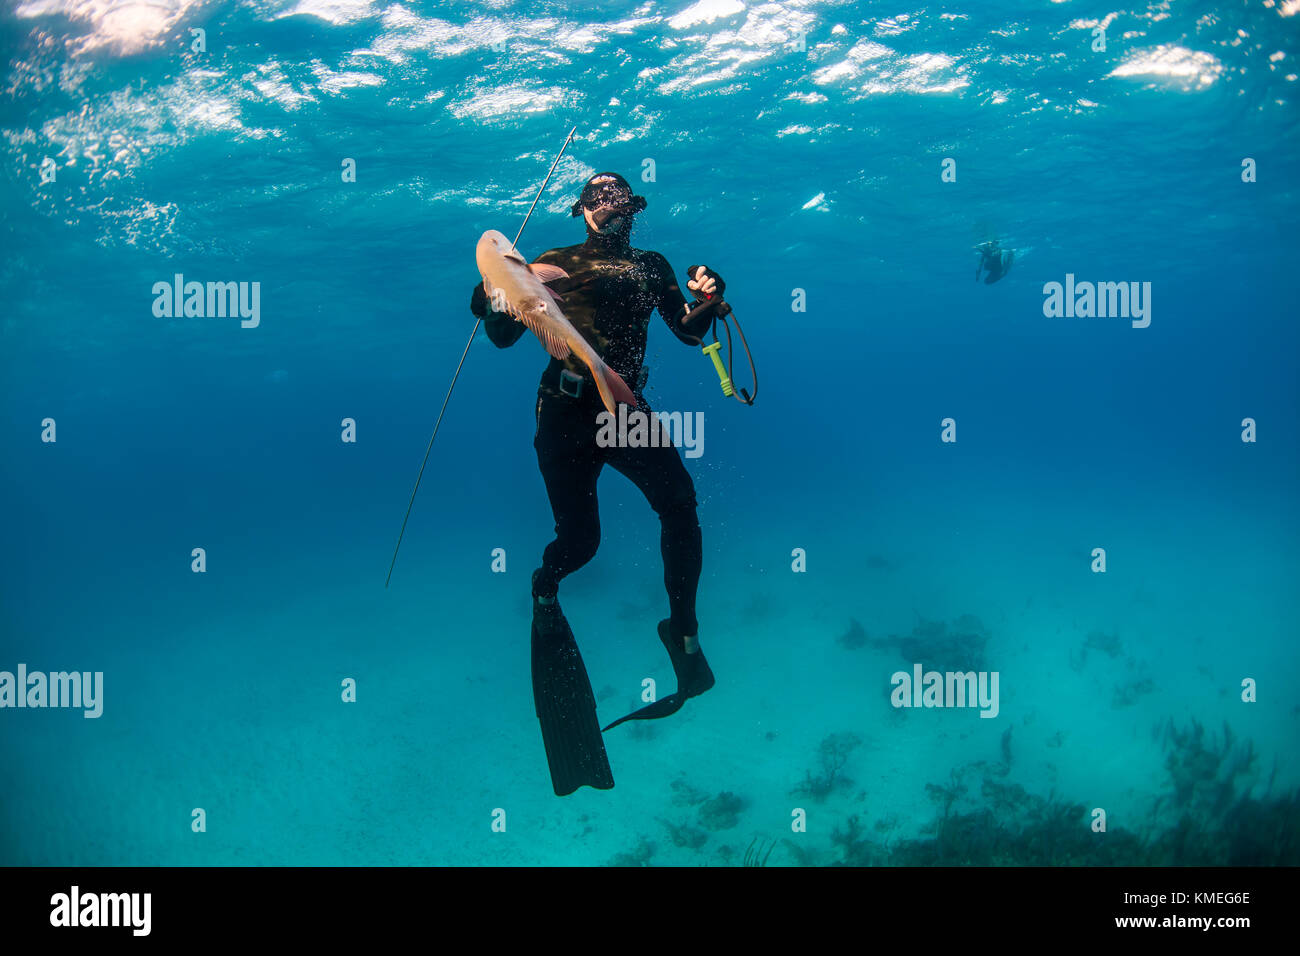 Diver surfacing with caught mutton snapper (Lutjanus analis) while spearfishing in ocean, Clarence Town, Long Island, Bahamas Stock Photo